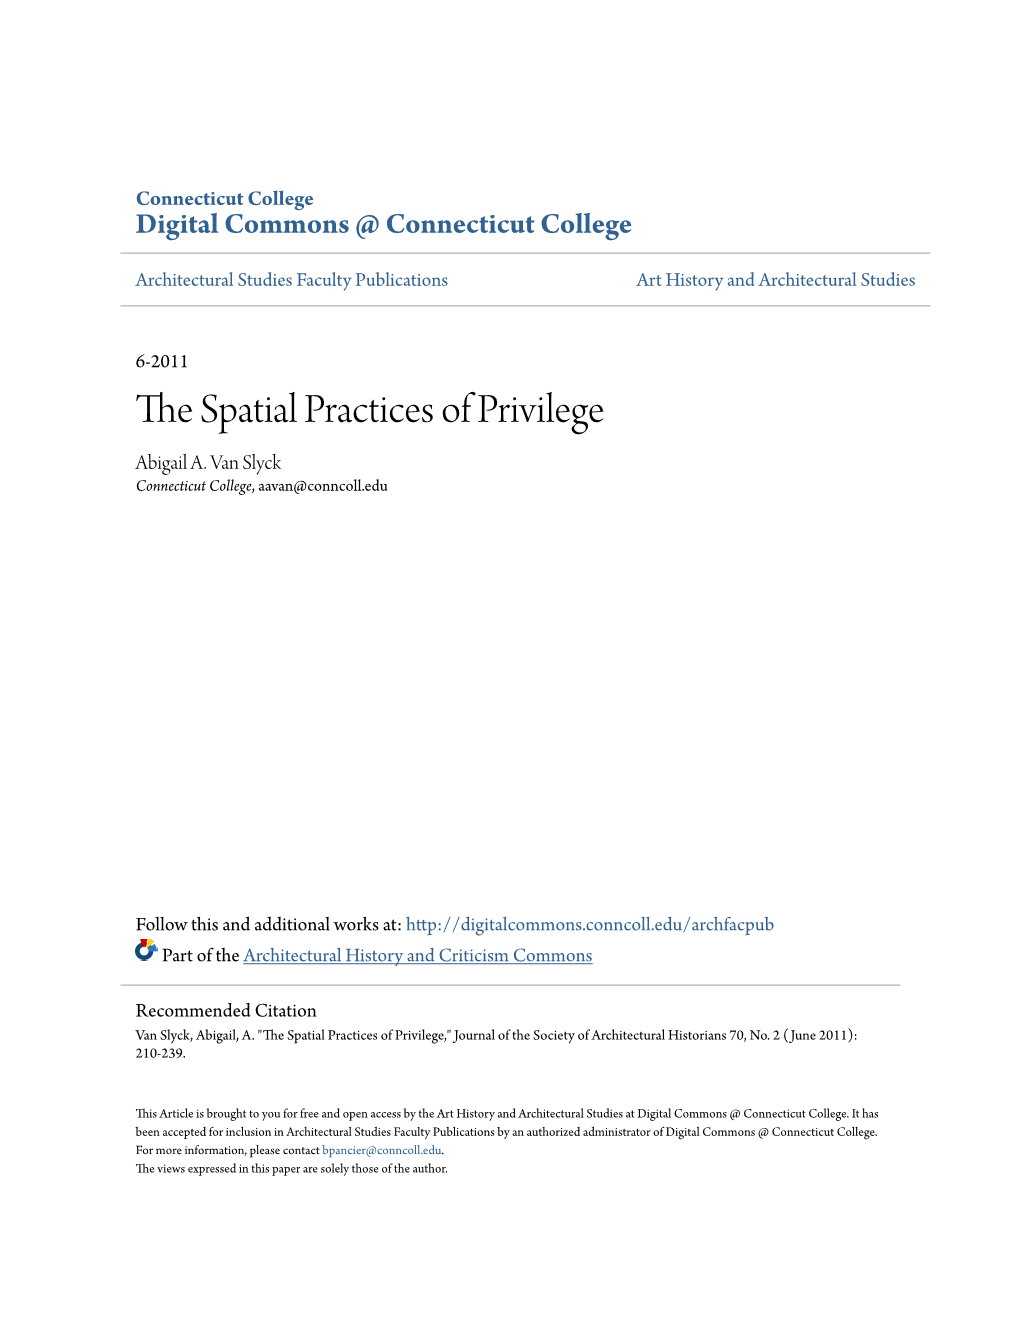 The Spatial Practices of Privilege Author(S): Abigail A